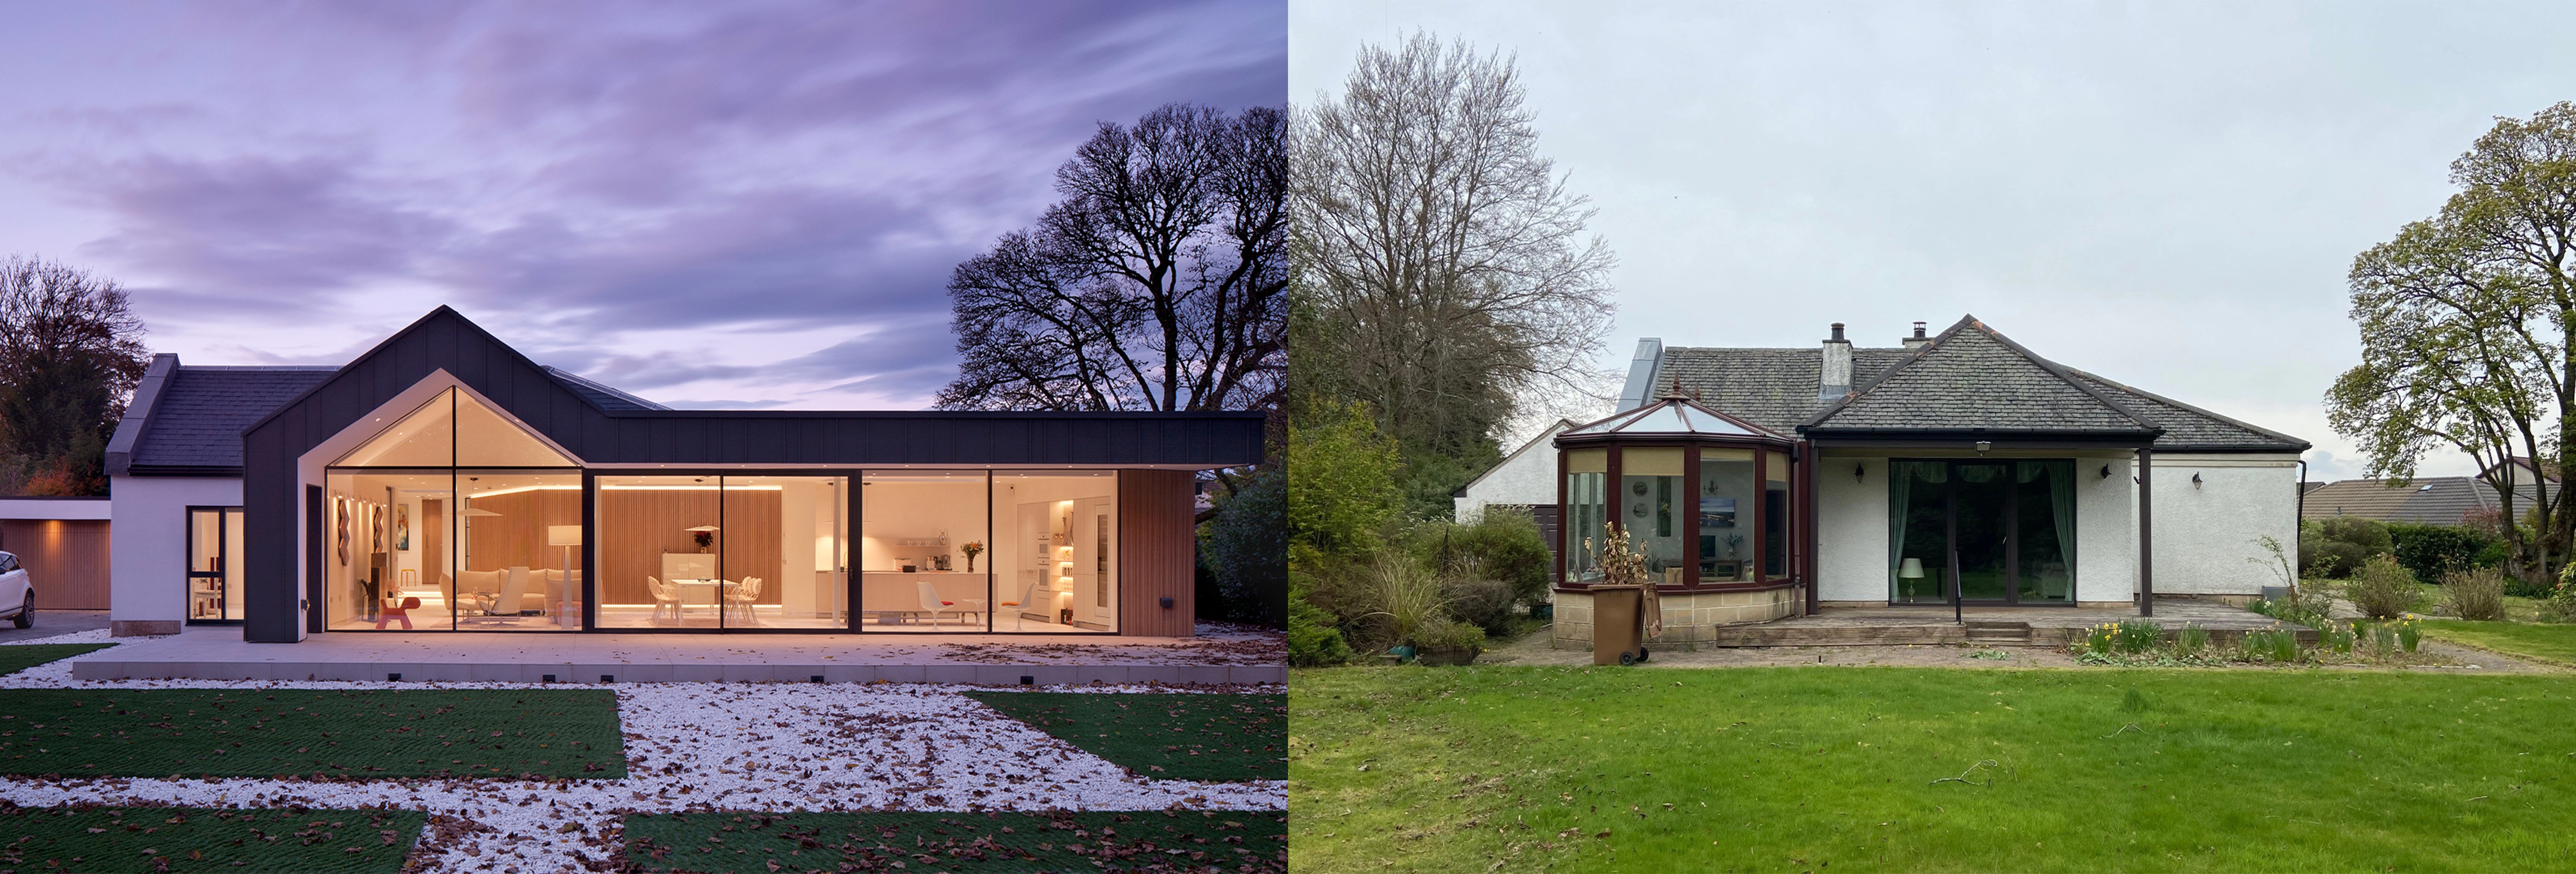 Before and after image of a recently renovated house with floor to ceiling windows, LED lights, spacious open plan living dining and kitchen, a a large garden from which the photo is taken looking at the lit interior.